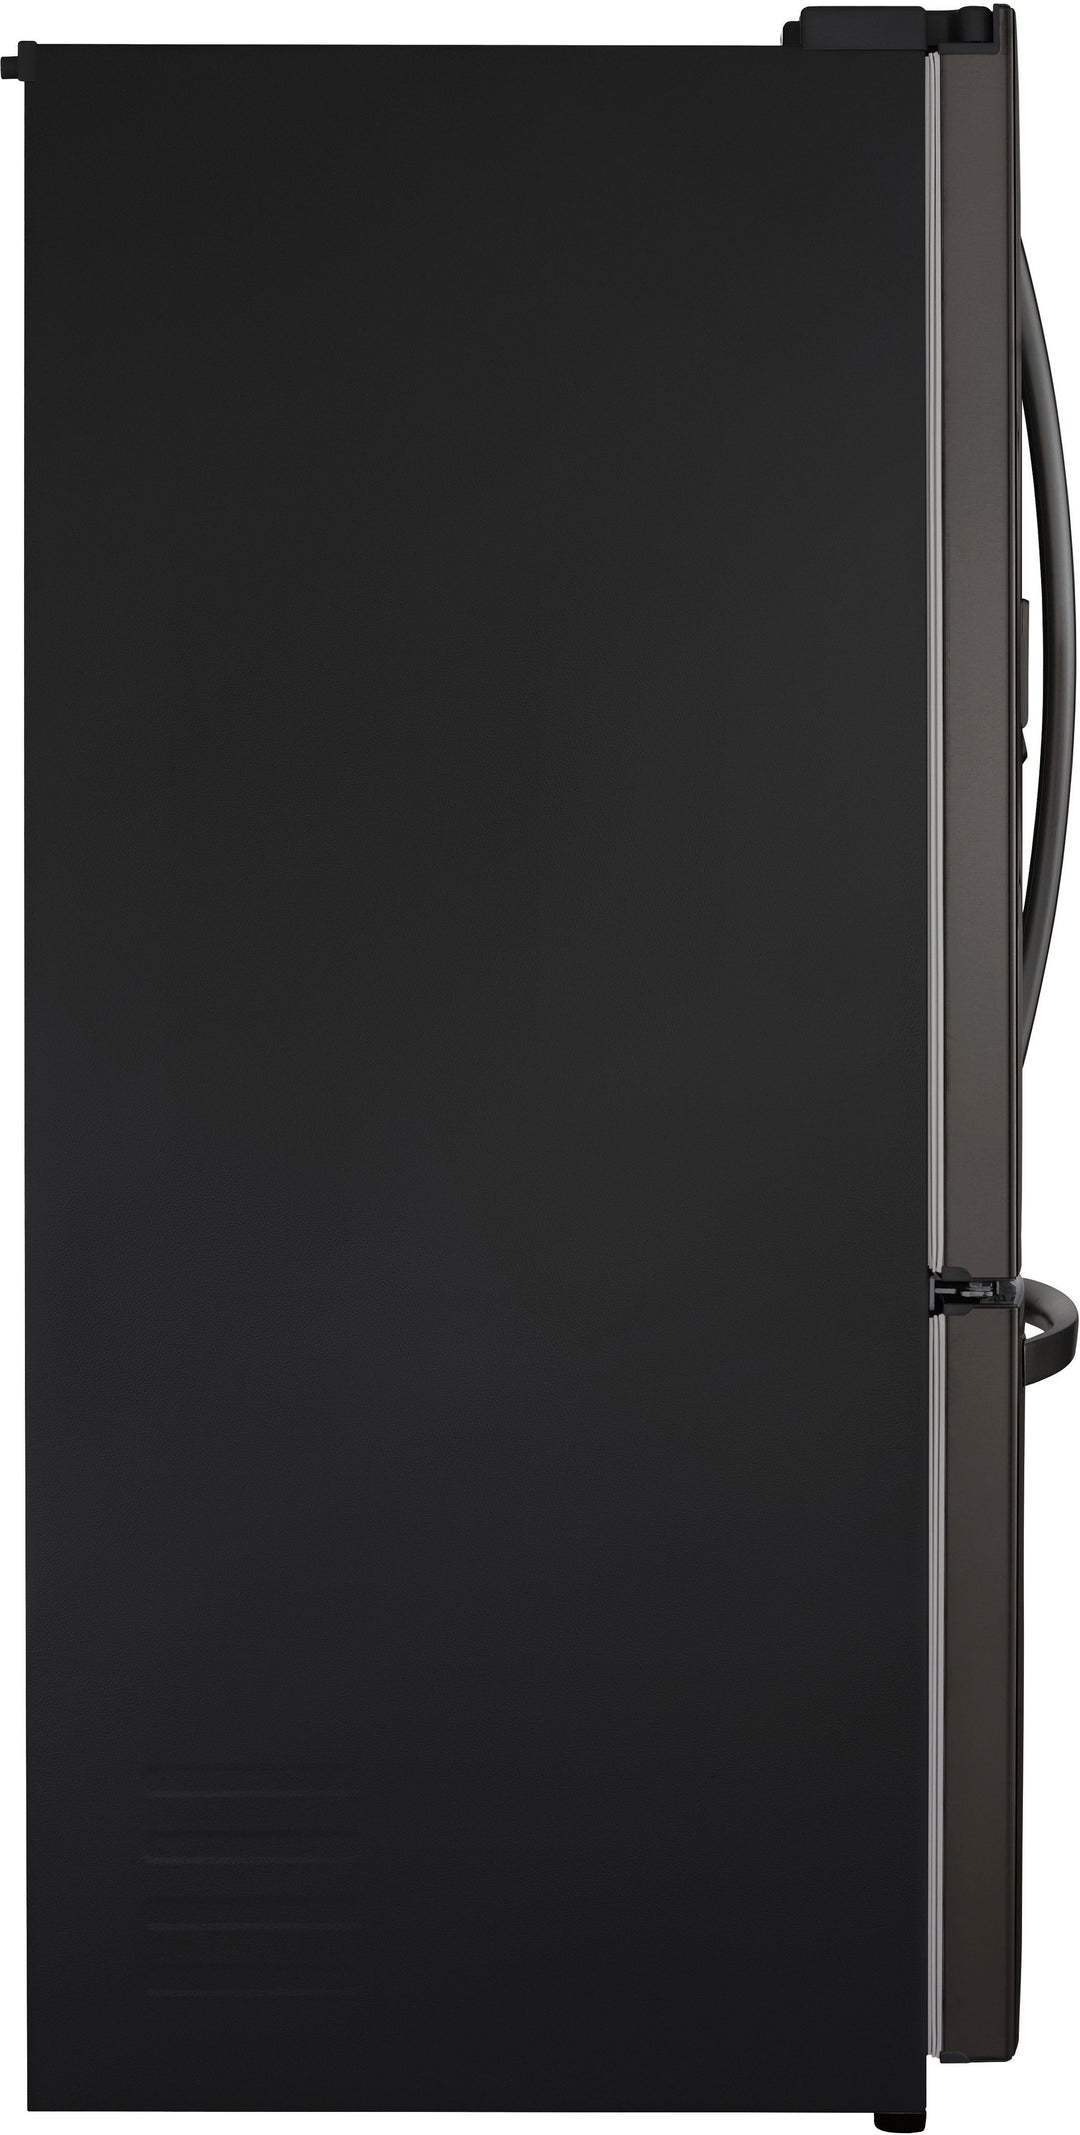 LG - 26.2 Cu. Ft. French Door Smart Refrigerator with Dual Ice Maker - Black stainless steel_5